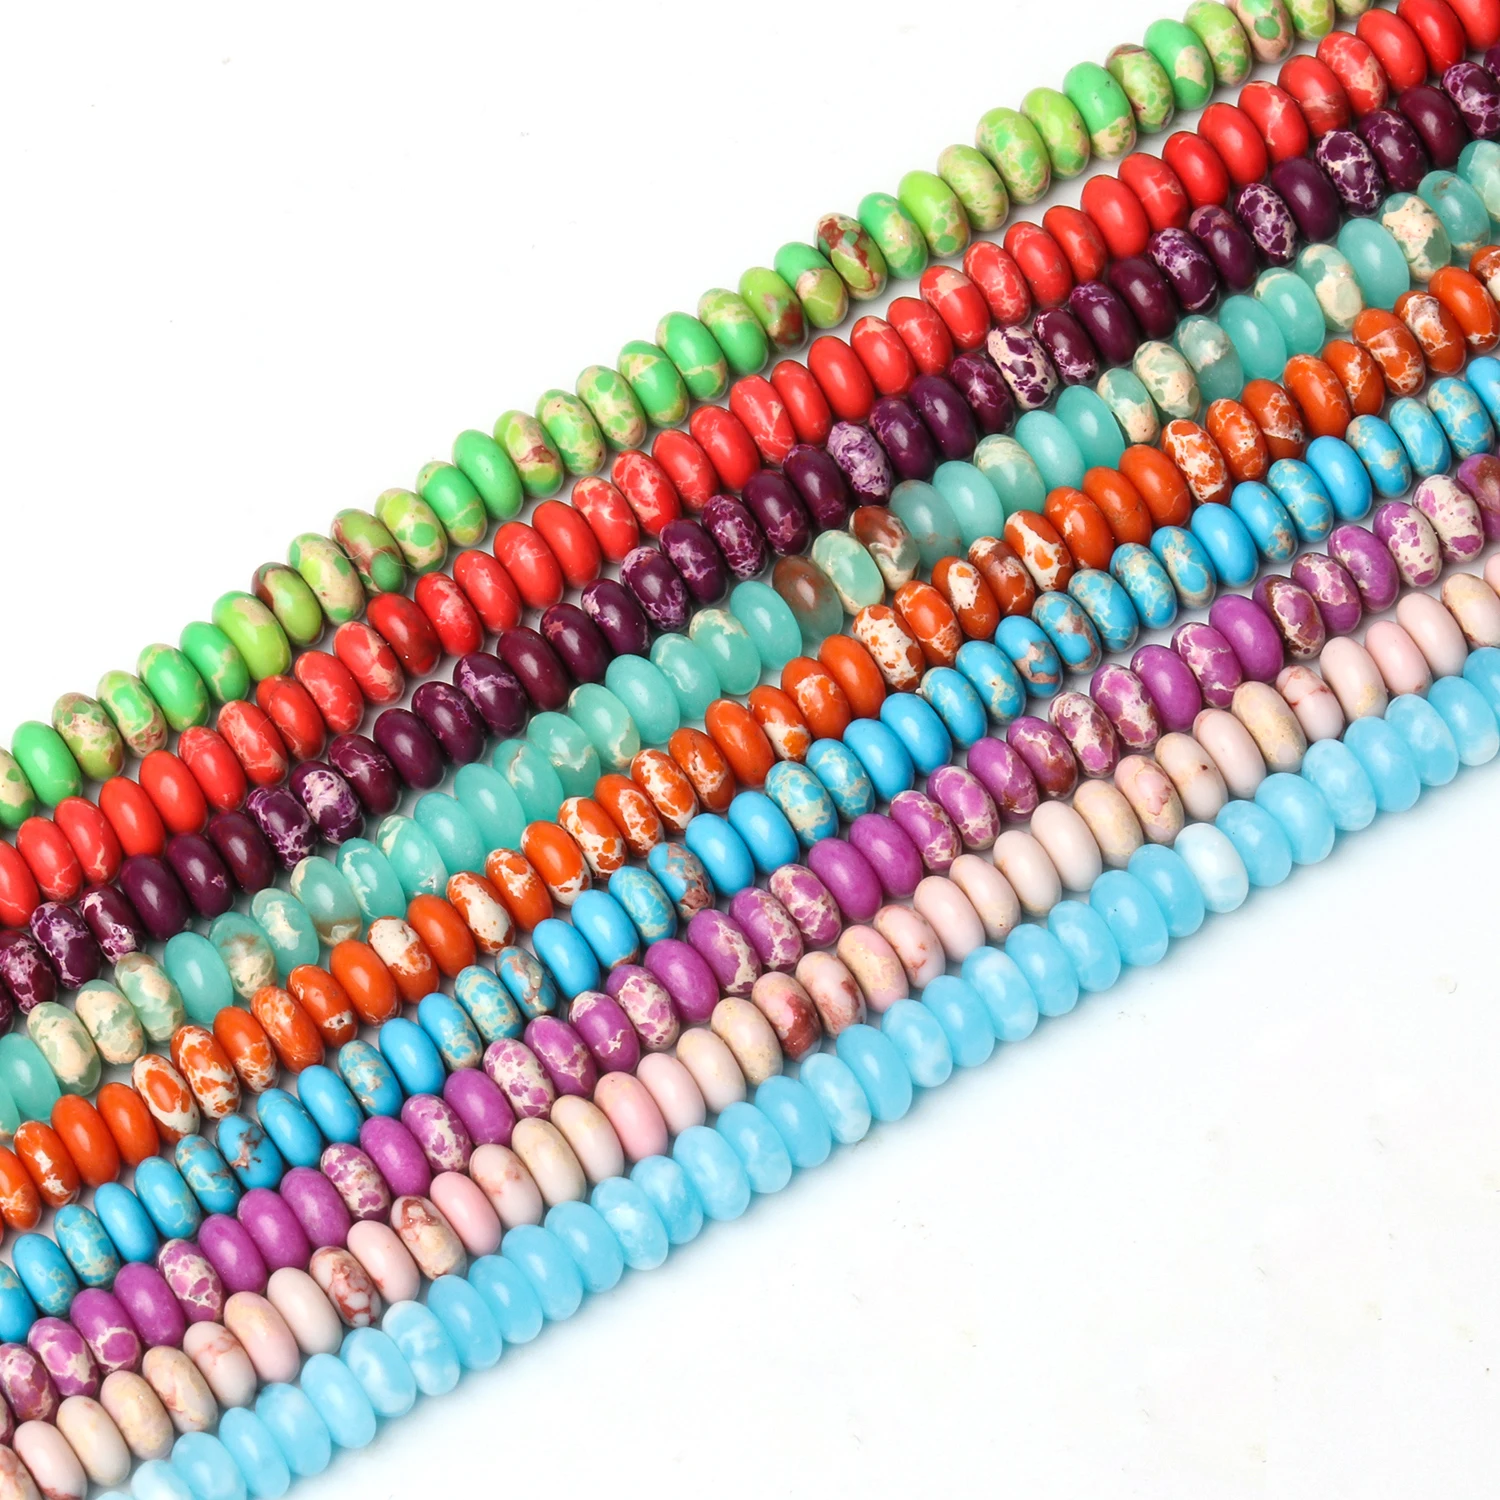 

5x2mm Natural Colorful Imperial Jaspers Sea Sediment Loose Spacer Flat Round Stone Beads For Jewelry Making DIY Bracelet Earring